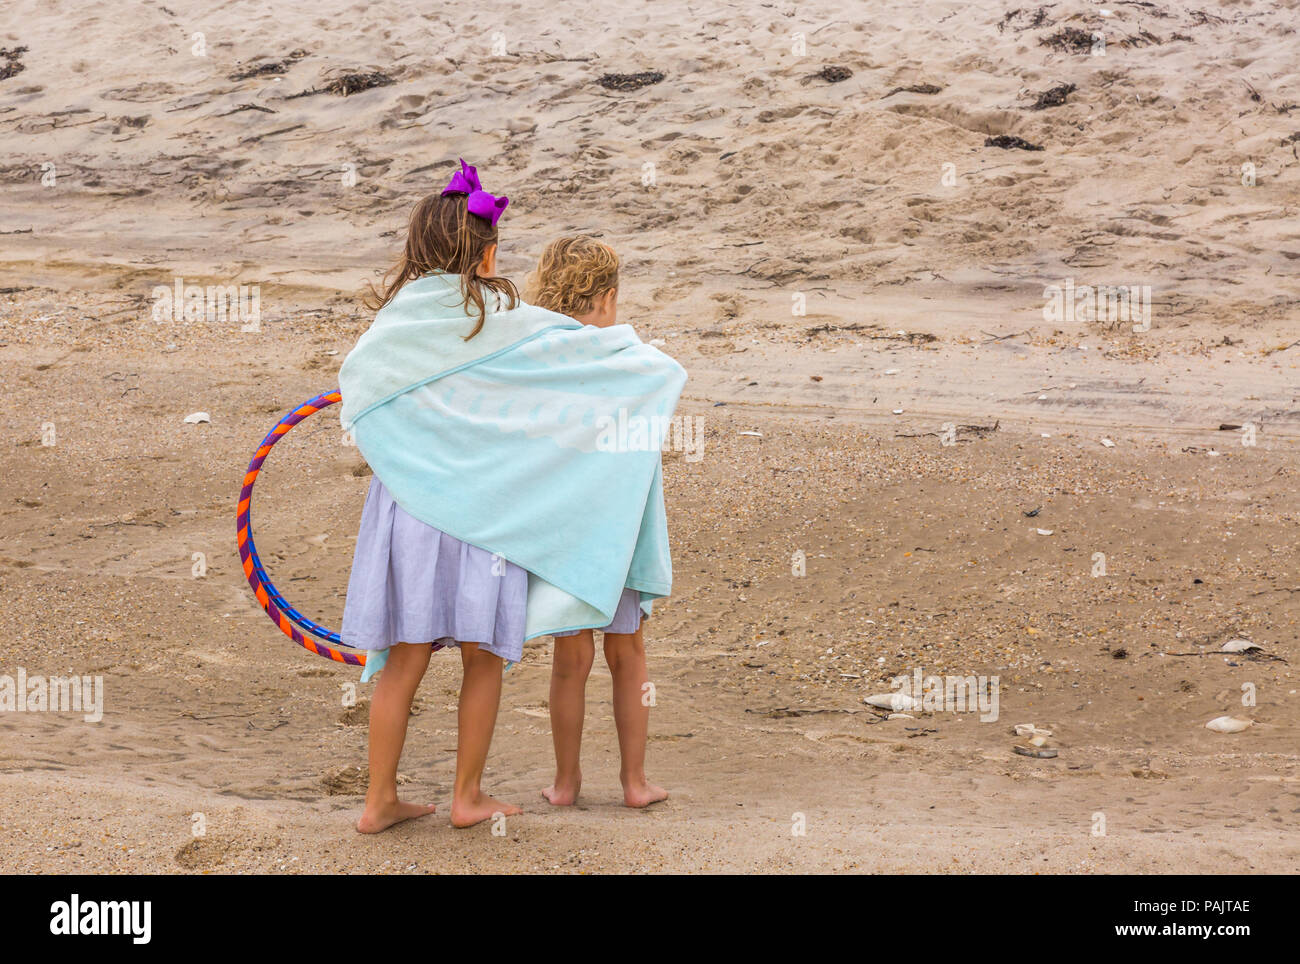 two young girls at the beach sharing a towel and looking away from the camera Stock Photo